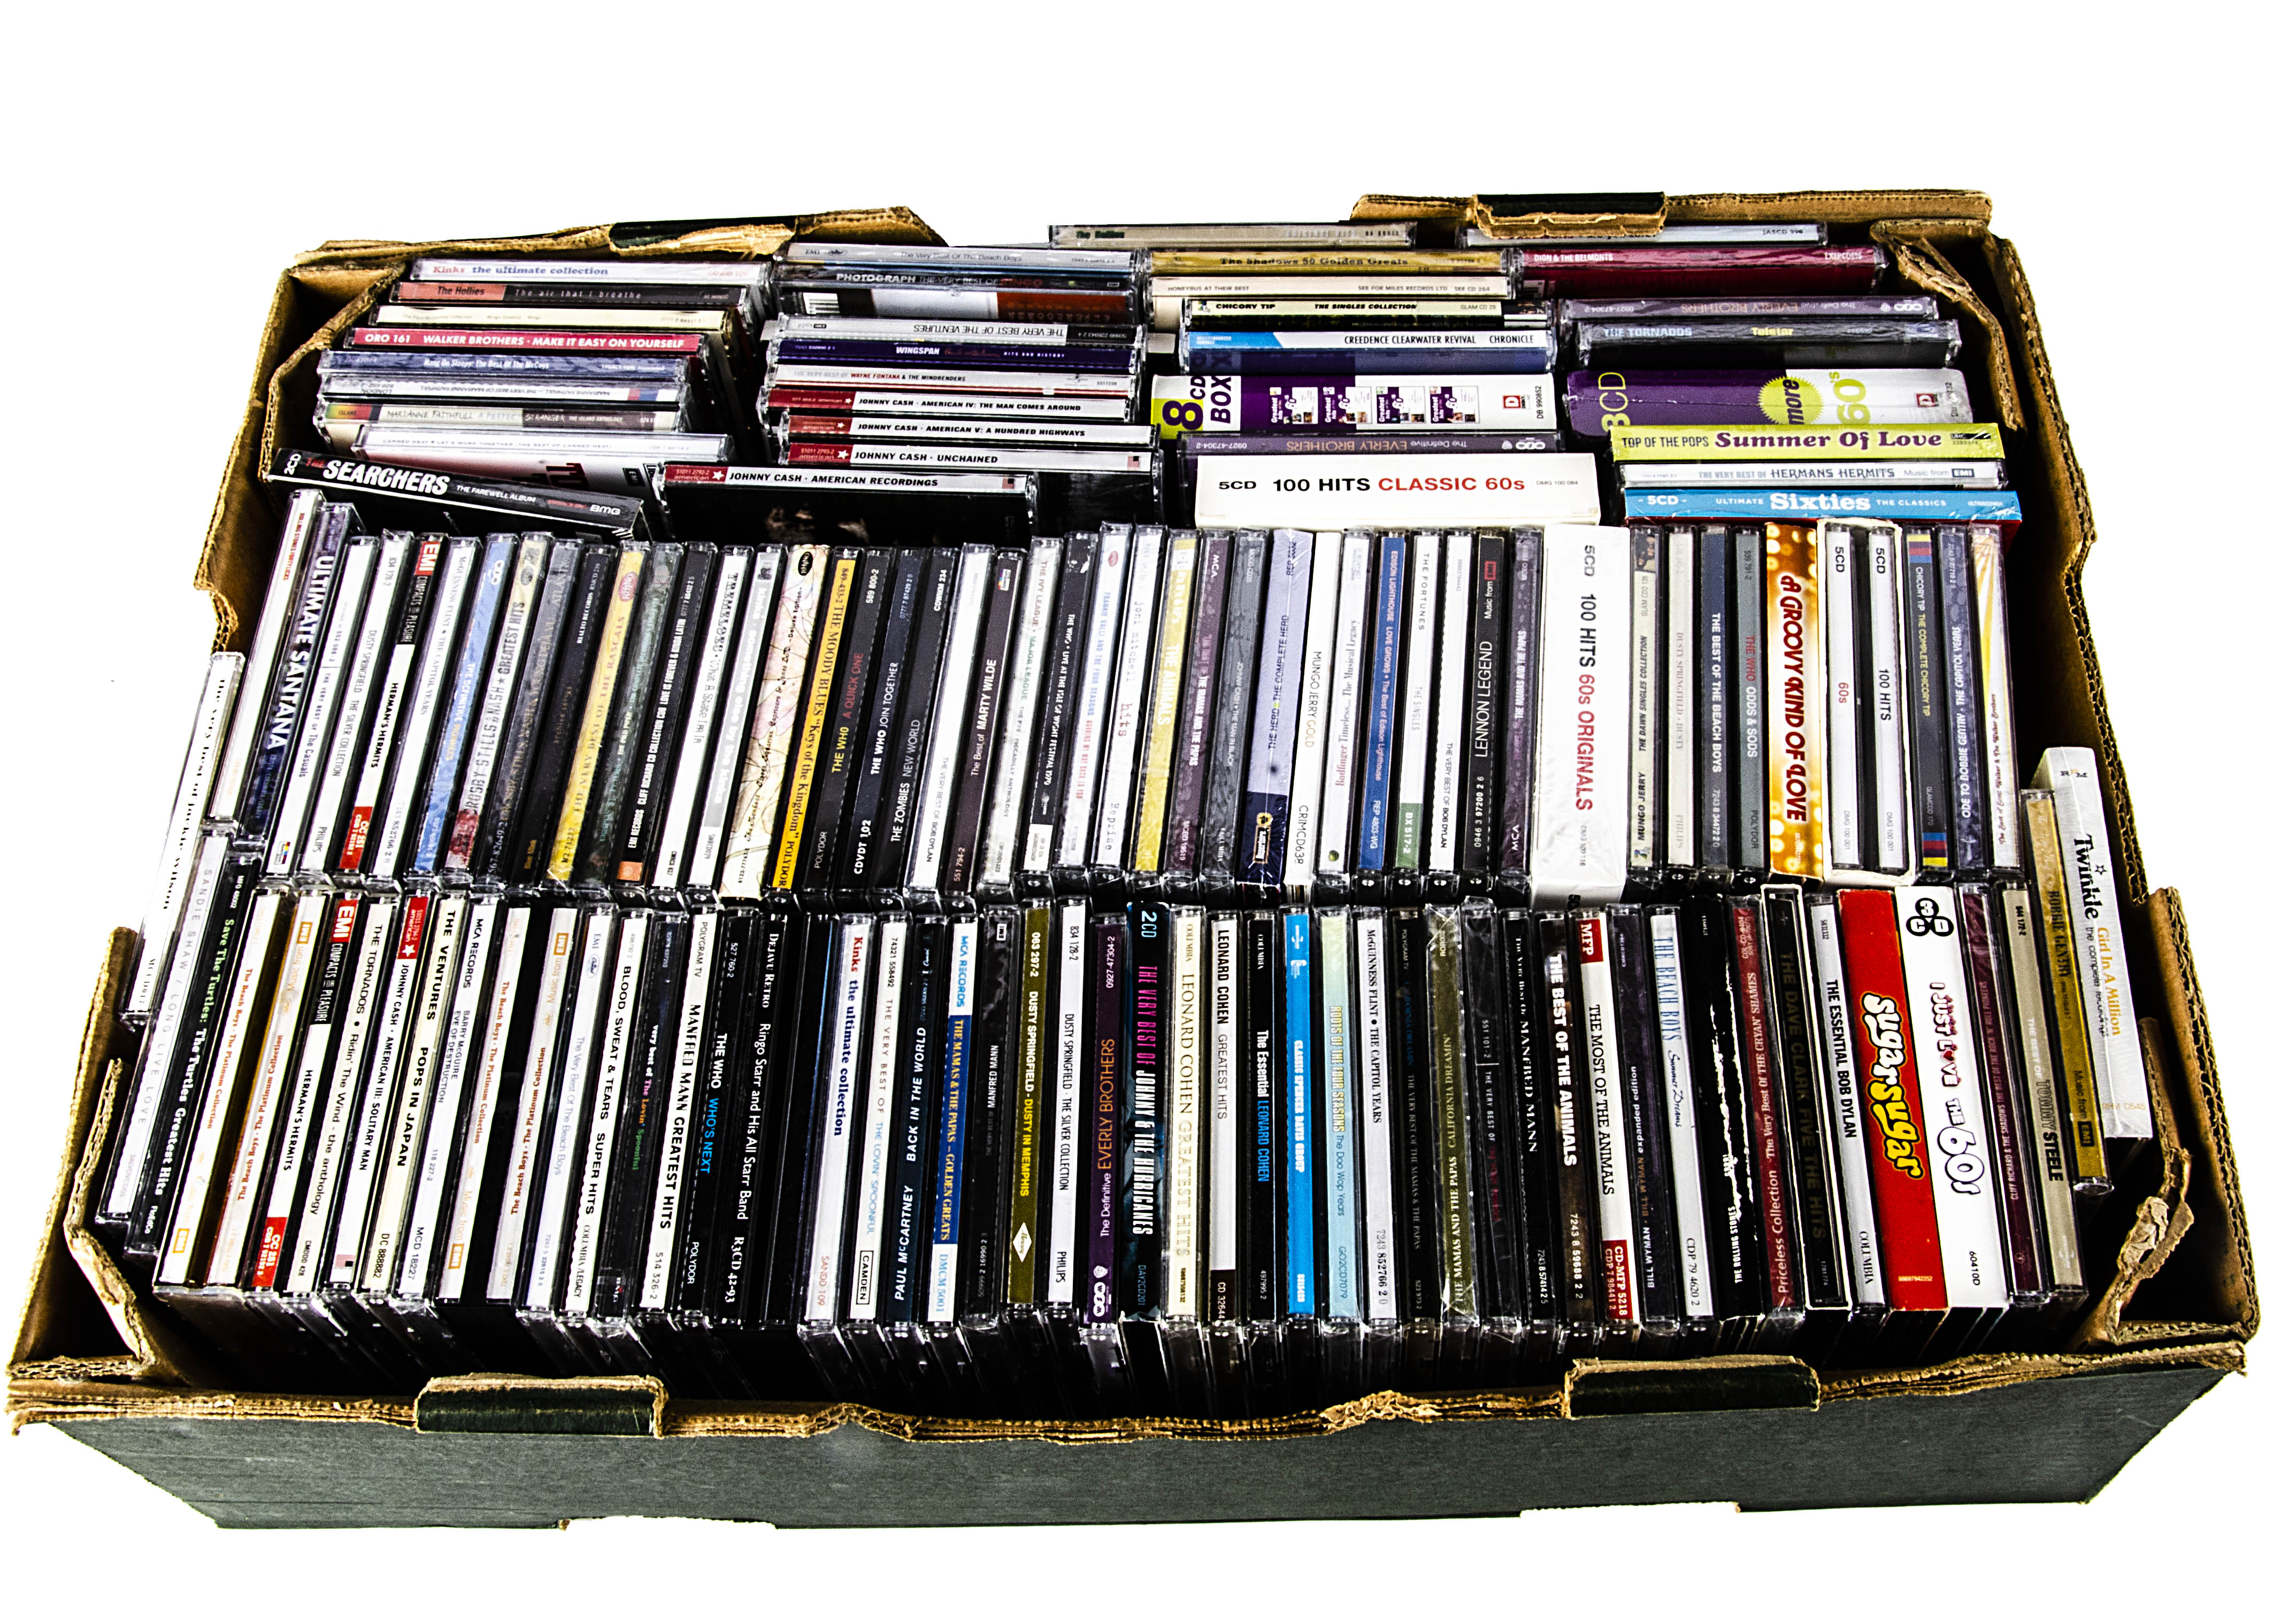 Sixties CDs / Box Sets, approximately one hundred and twenty CDs and twelve Box Sets of mainly